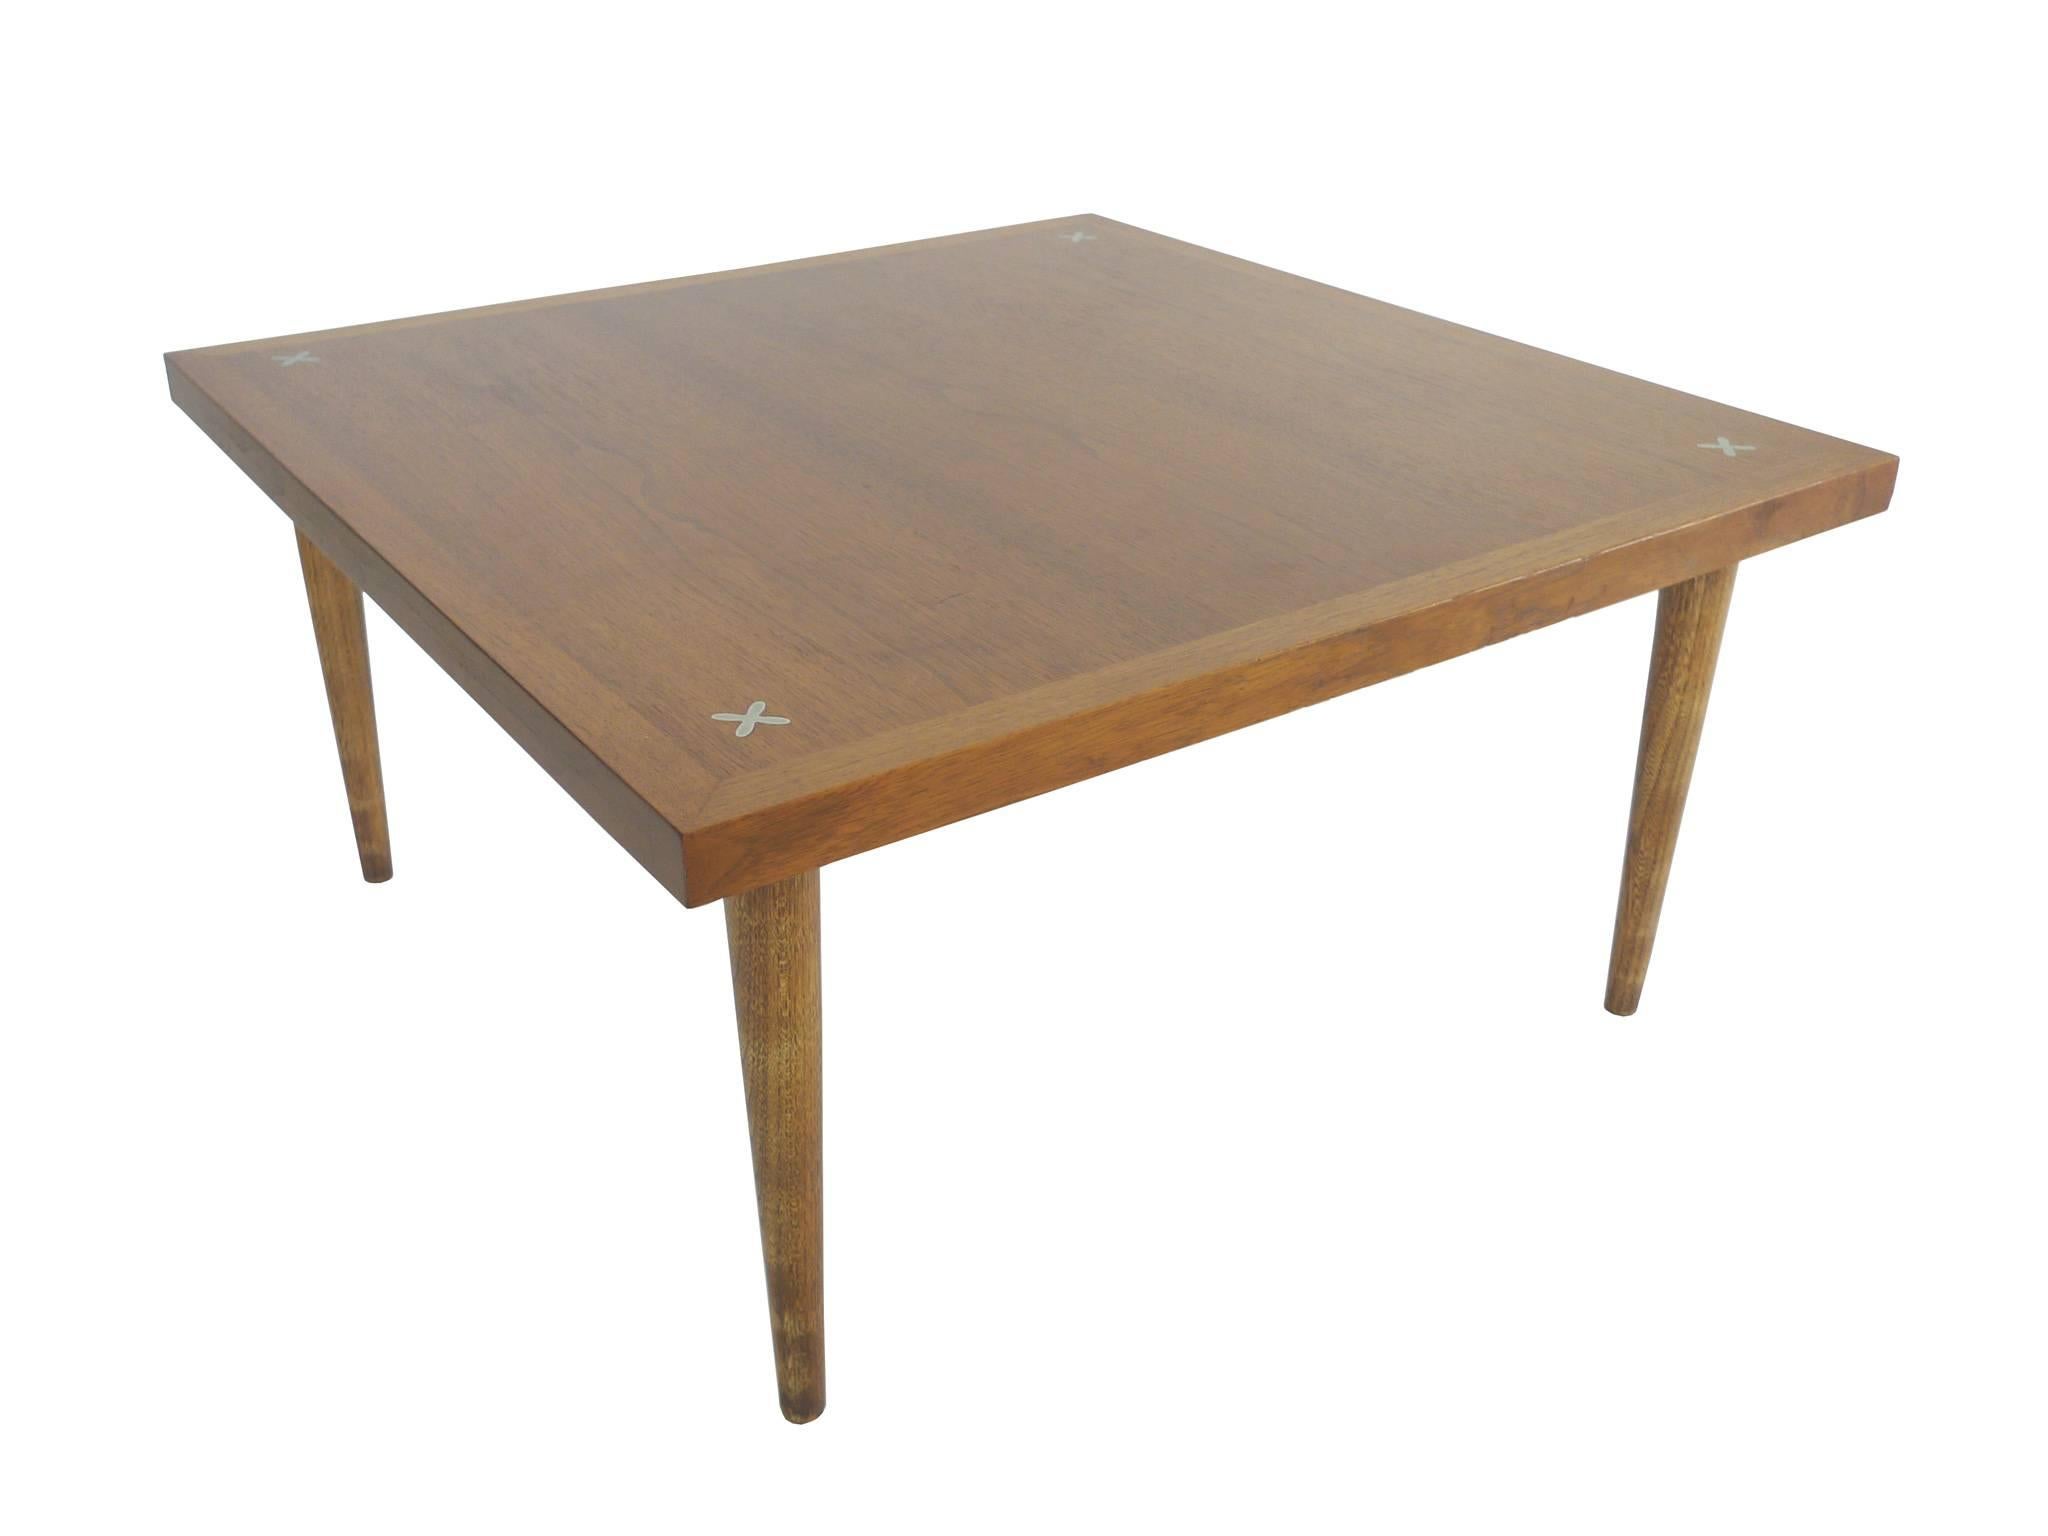 This square walnut cocktail table was designed by Merton Gershun for American of Martinsville. It is newly refinished. Brass X-inlays adorn the tabletop, one at each corner. The legs are high and taper downward. This is an elegant cocktail table,